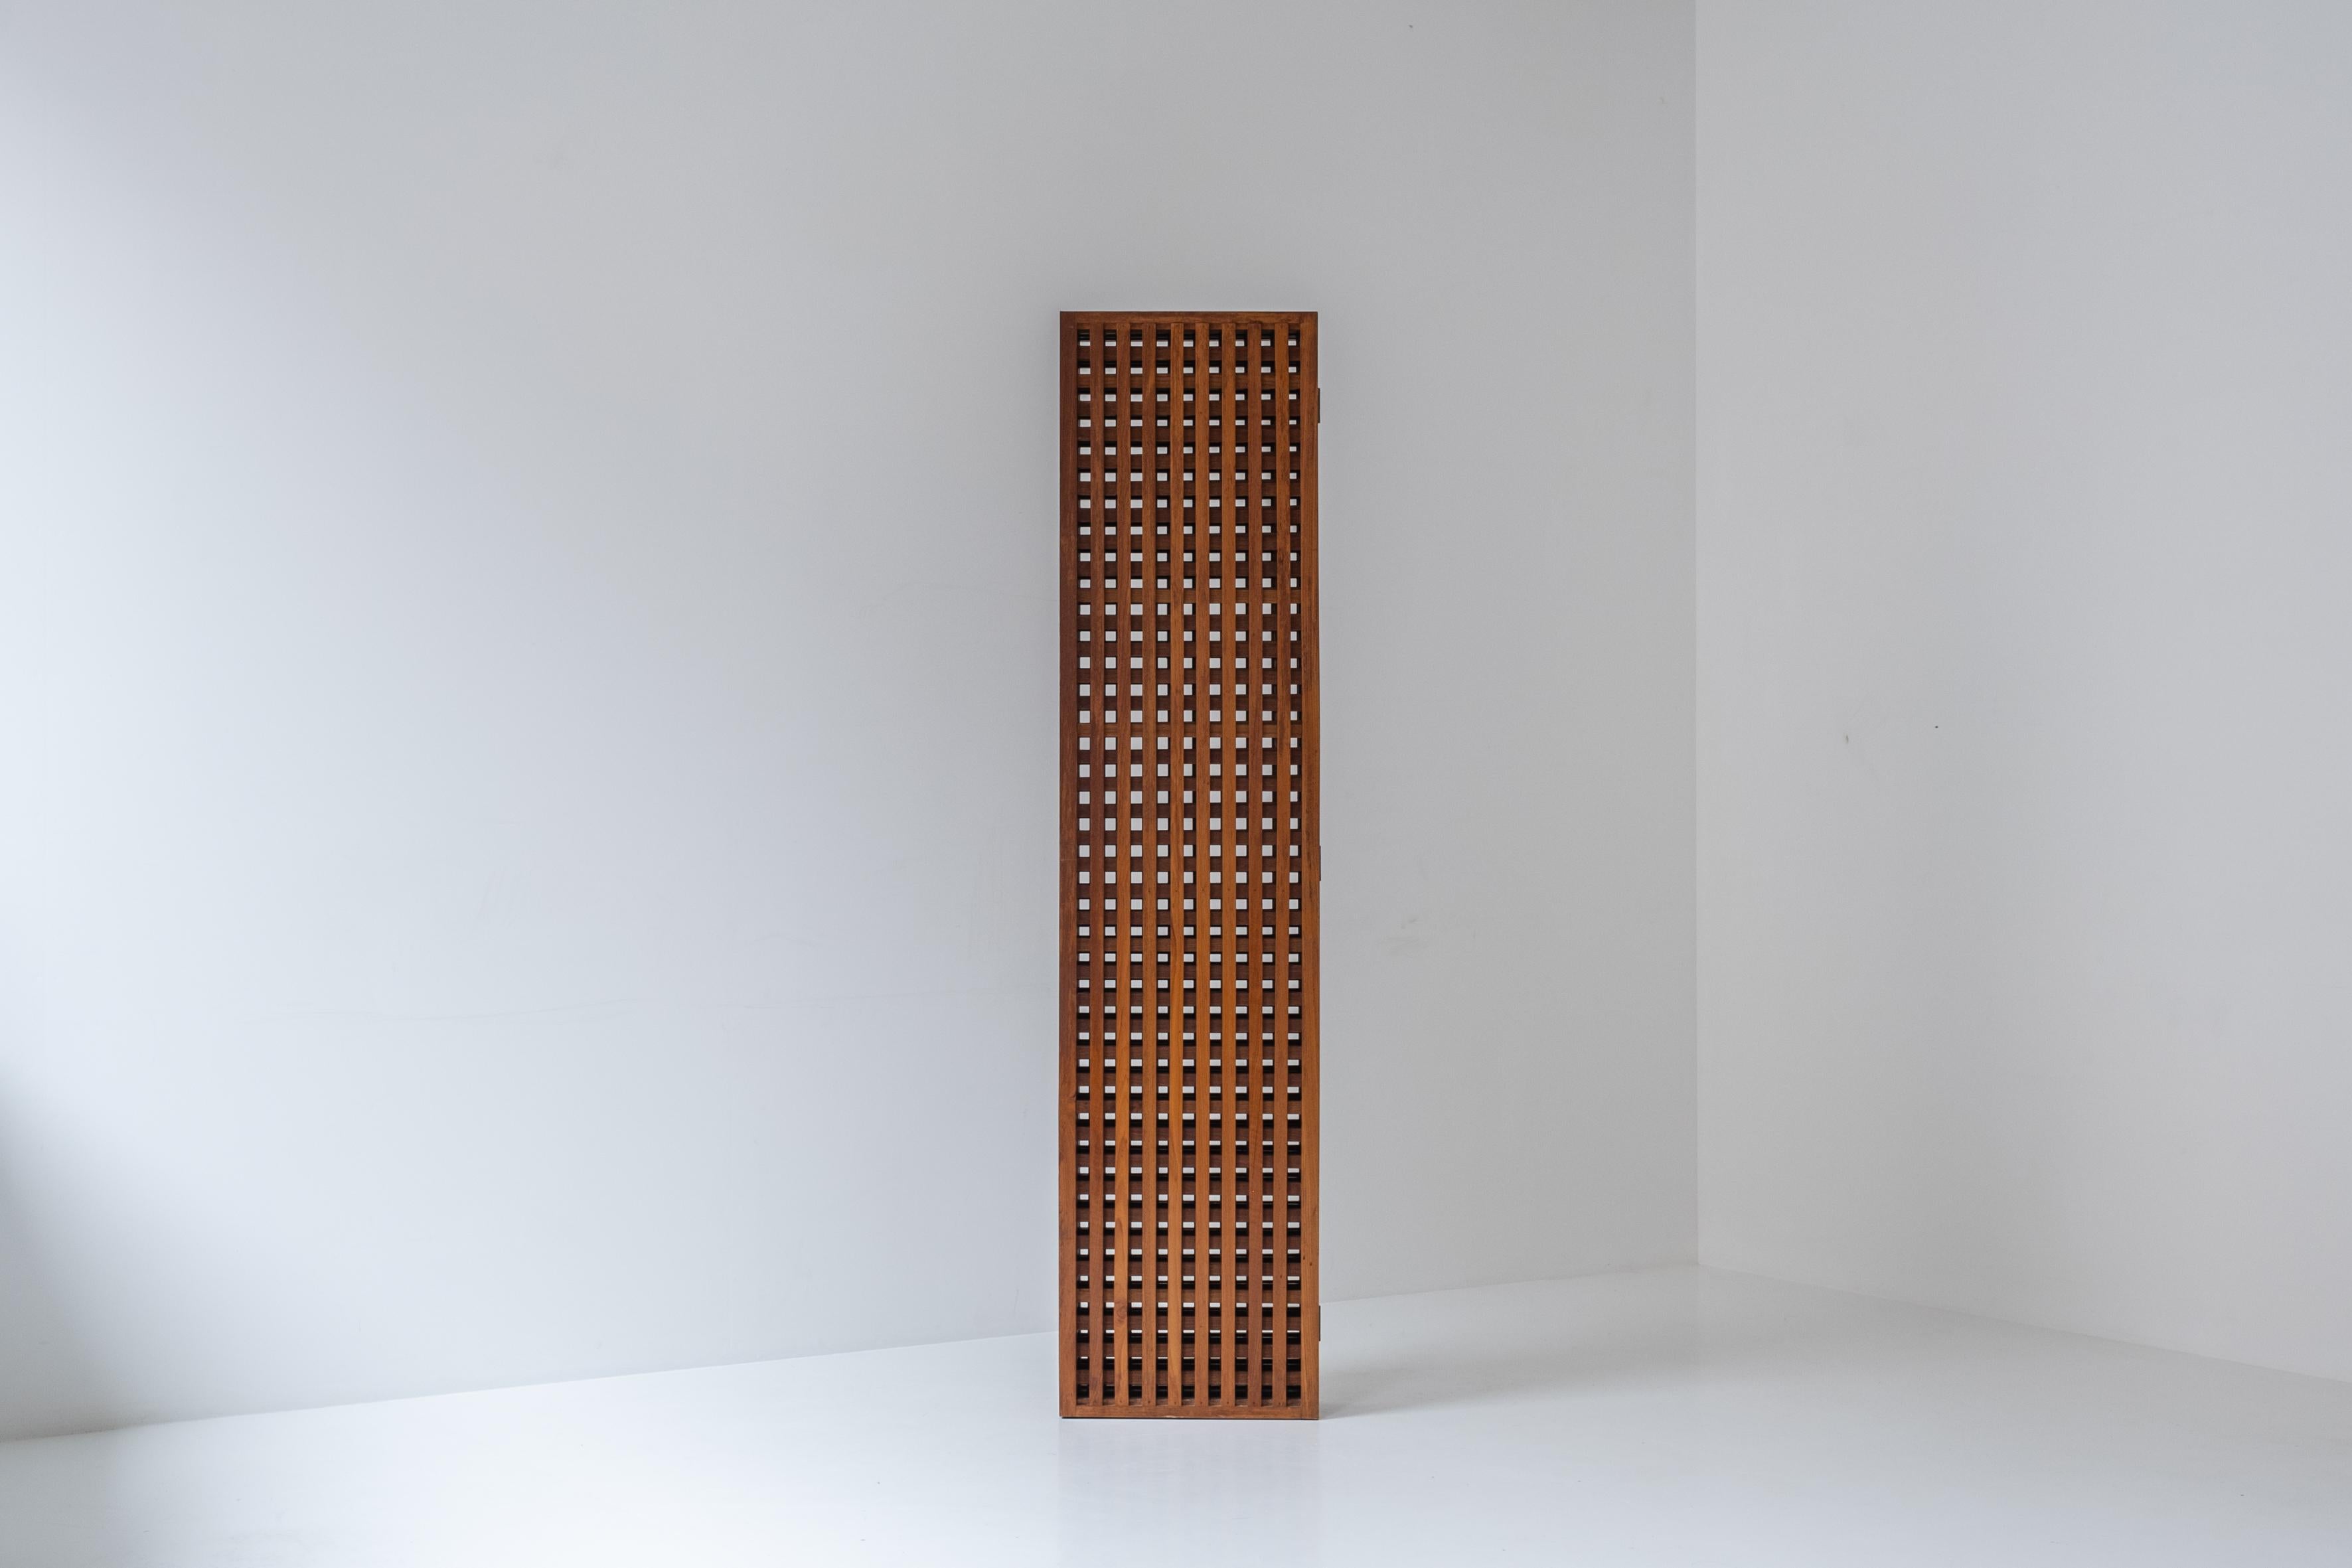 Room divider designed and manufactured in France during the 1960s. This screen features solid oak slats and add a very nice sculptural and Modernist feeling to the space. Presented in its original untouched condition. Dordogne chair for scale.